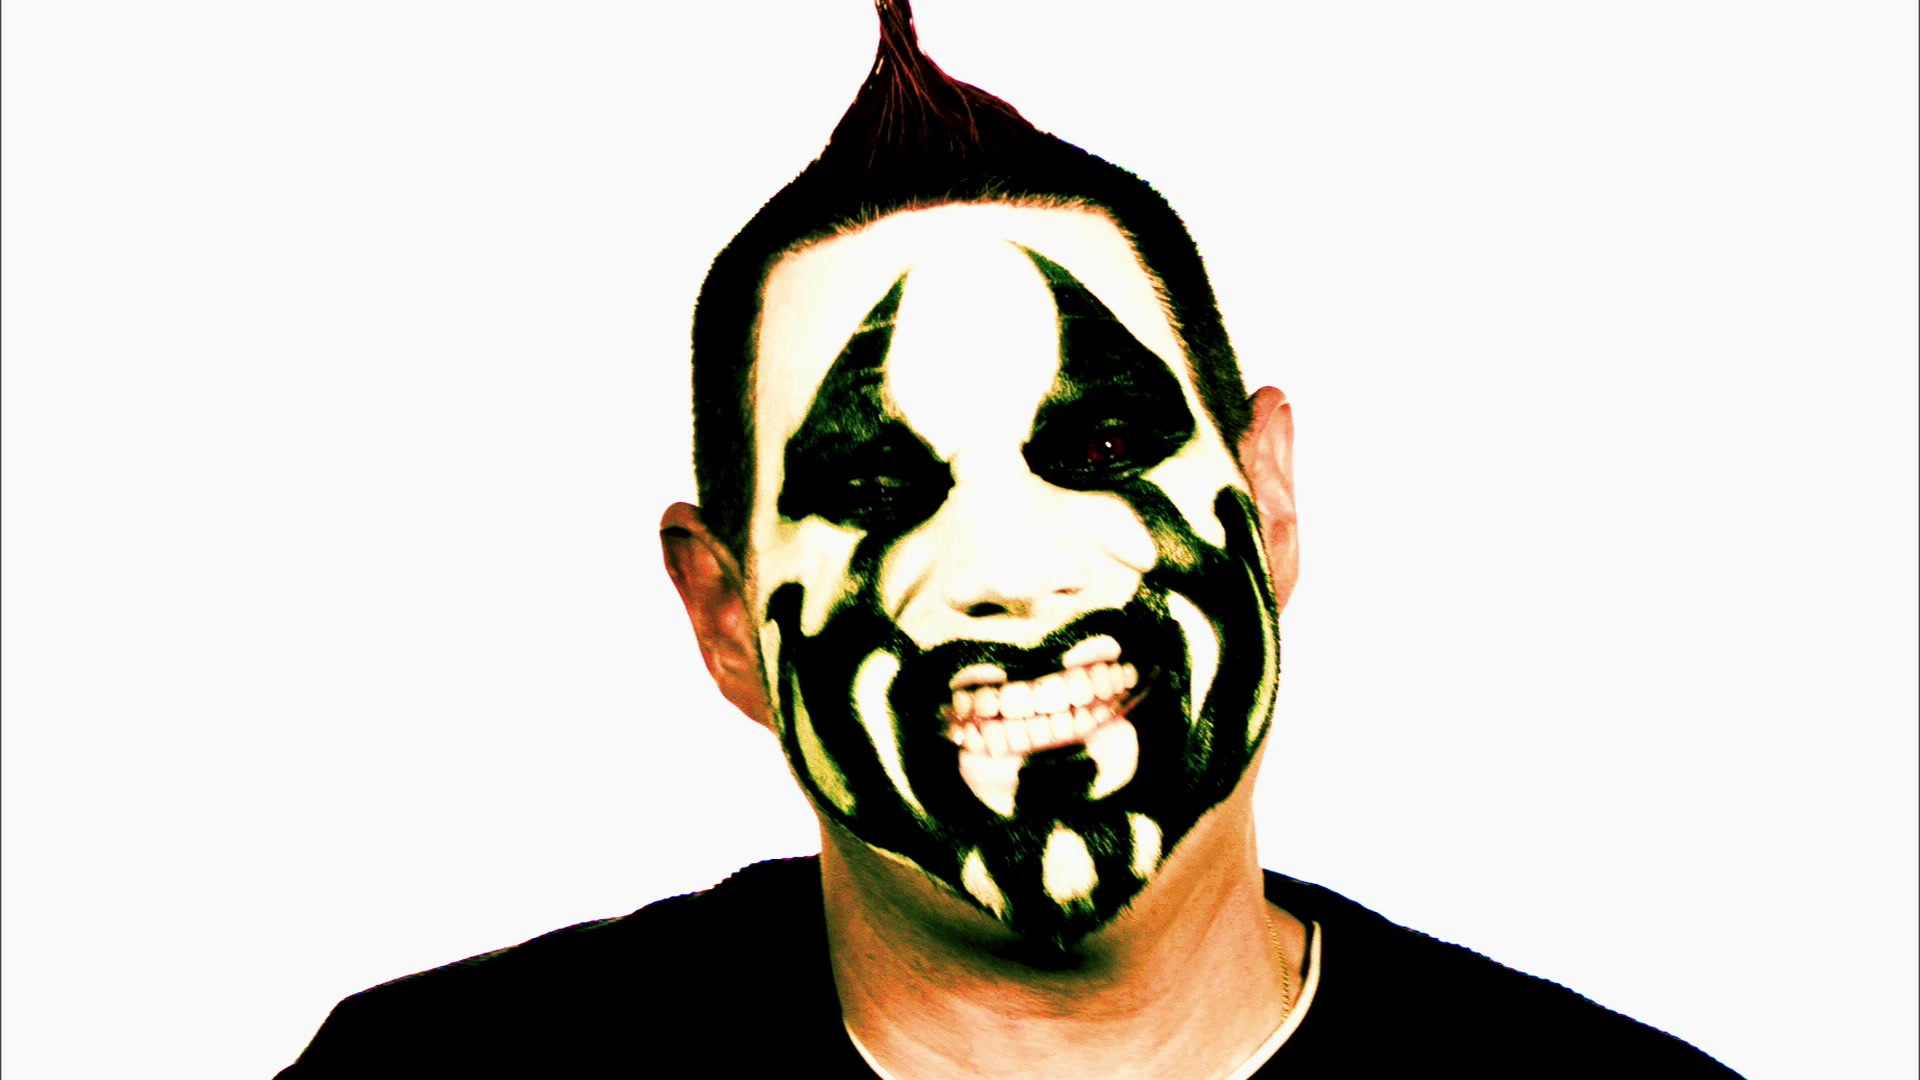 Twiztid Face Paint Designs - Twiztid How To Properly Apply Juggalo Face Pai...